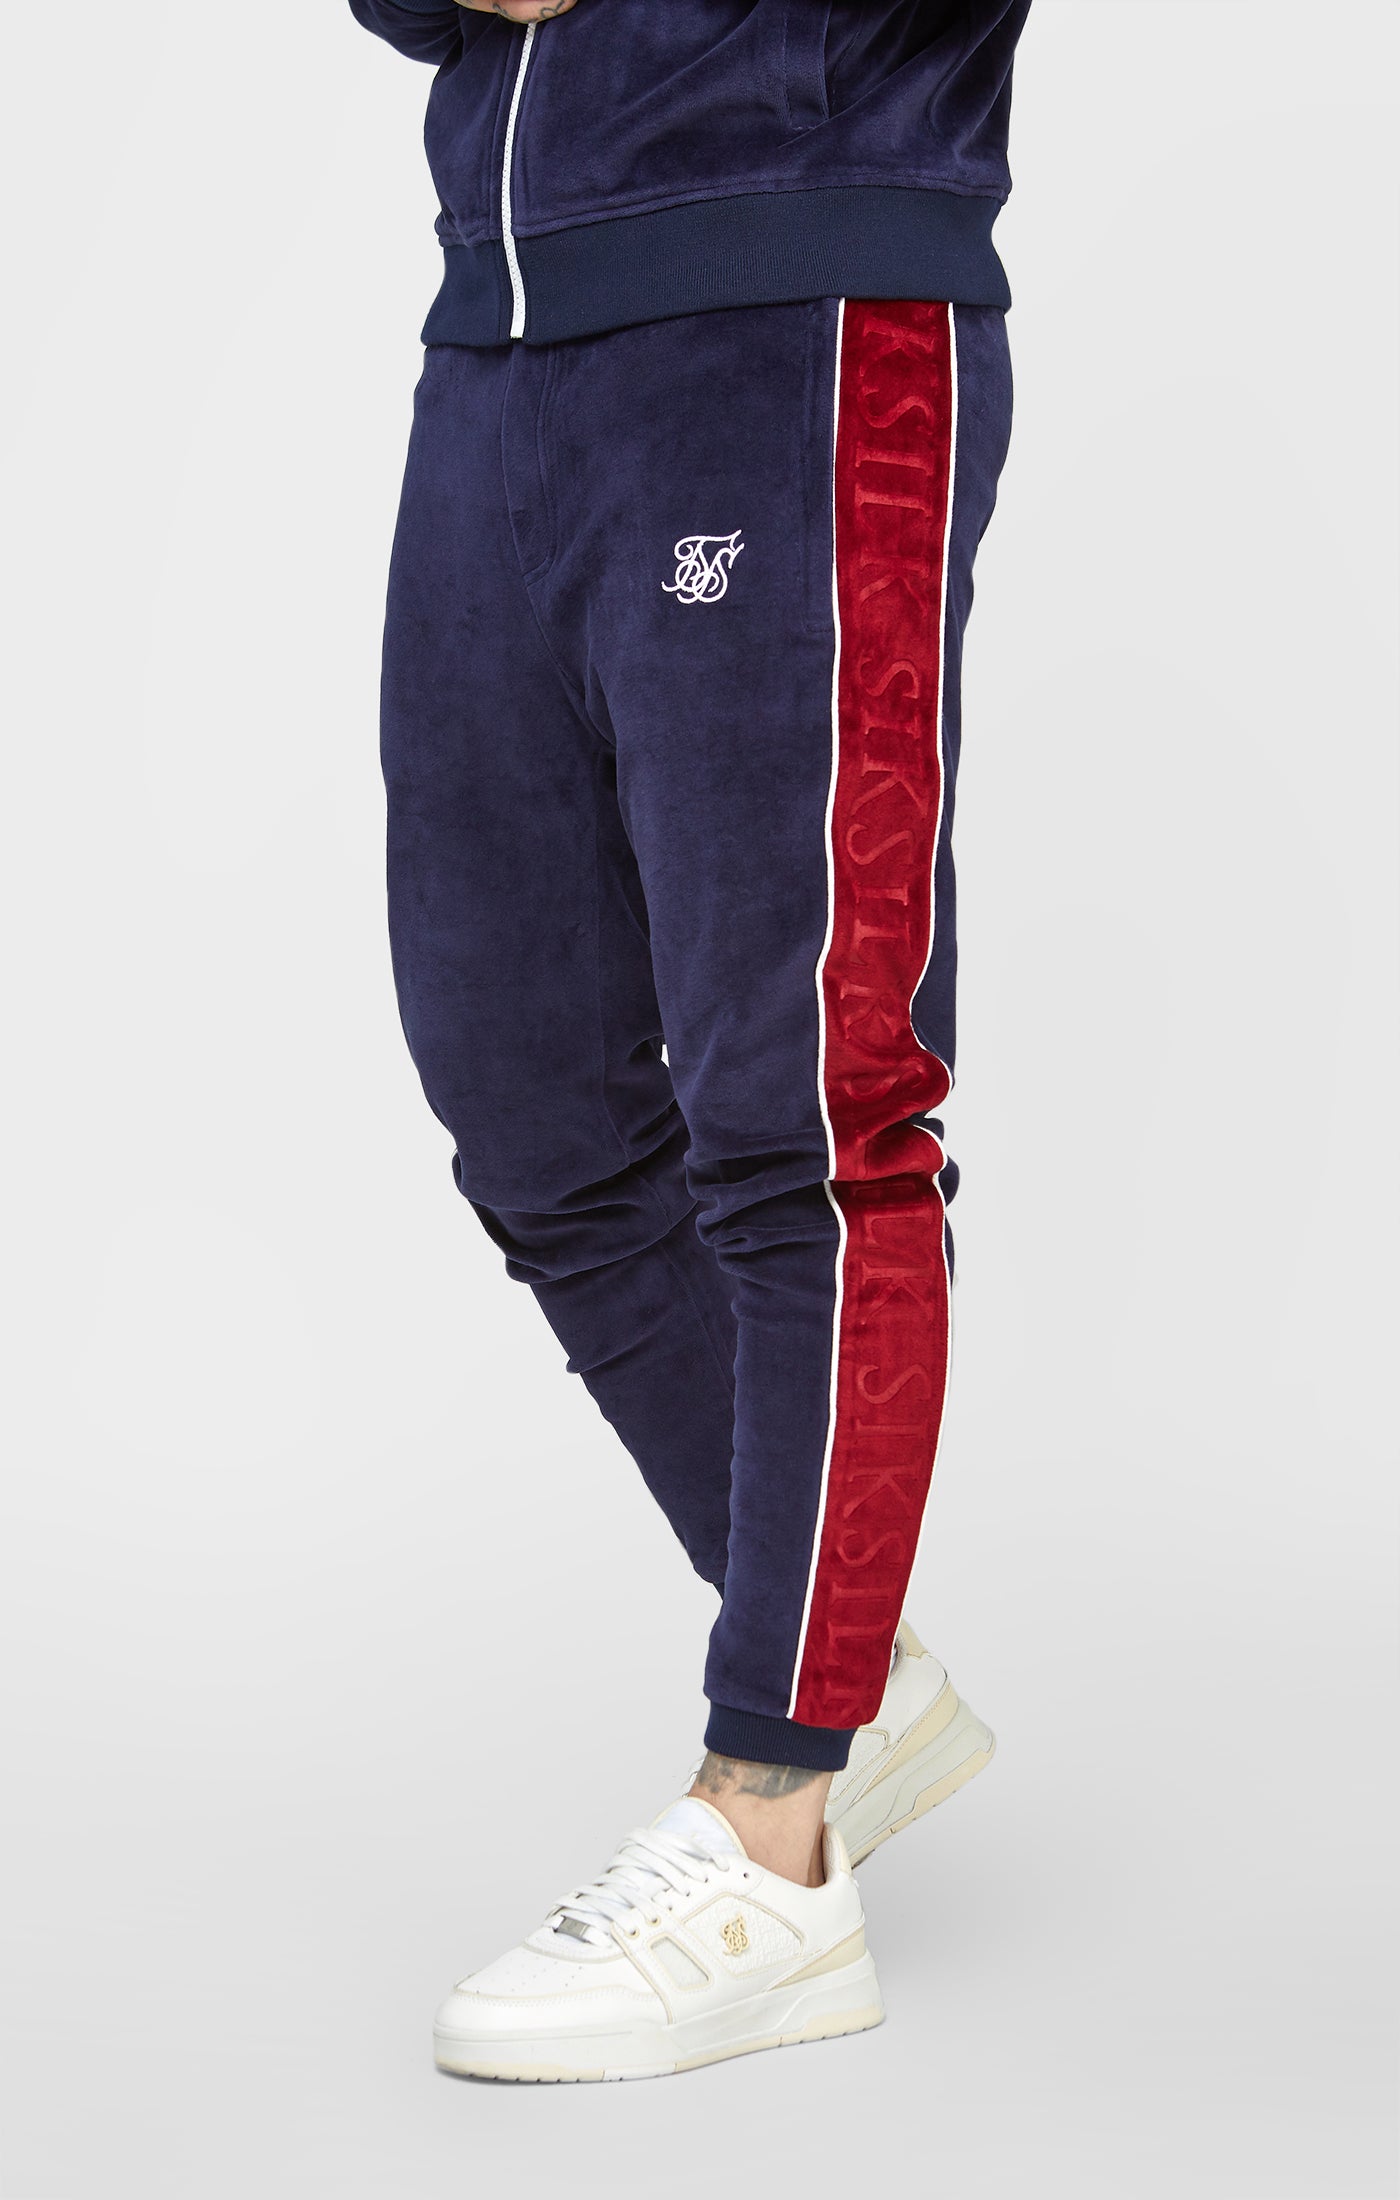 Unisex Polyester Men Navy Blue Sports Track Pant at Rs 155/piece in Ludhiana